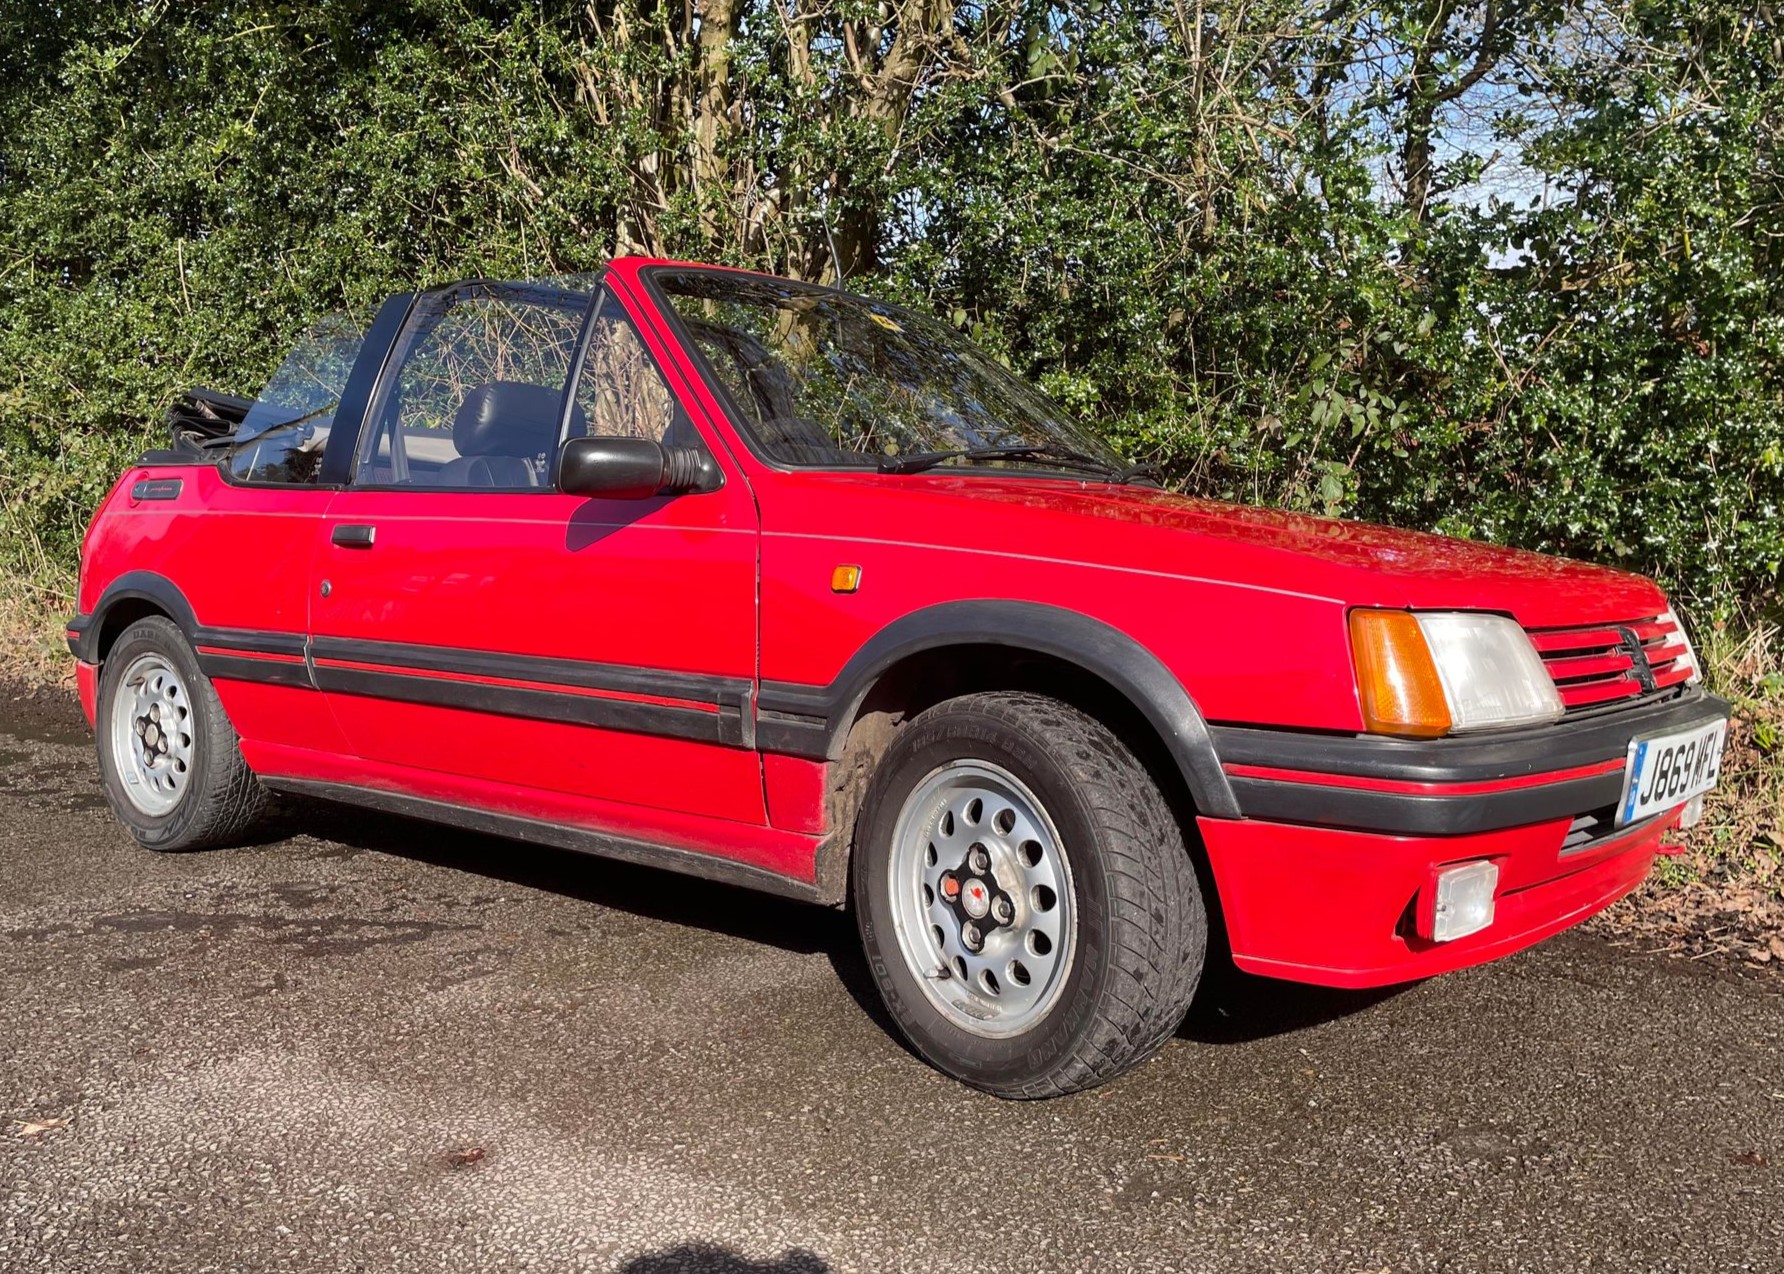 Peugeot 205 Cti 1.6 convertible - Mot'd 83,000 miles This stunning low mileage car has been - Image 3 of 18